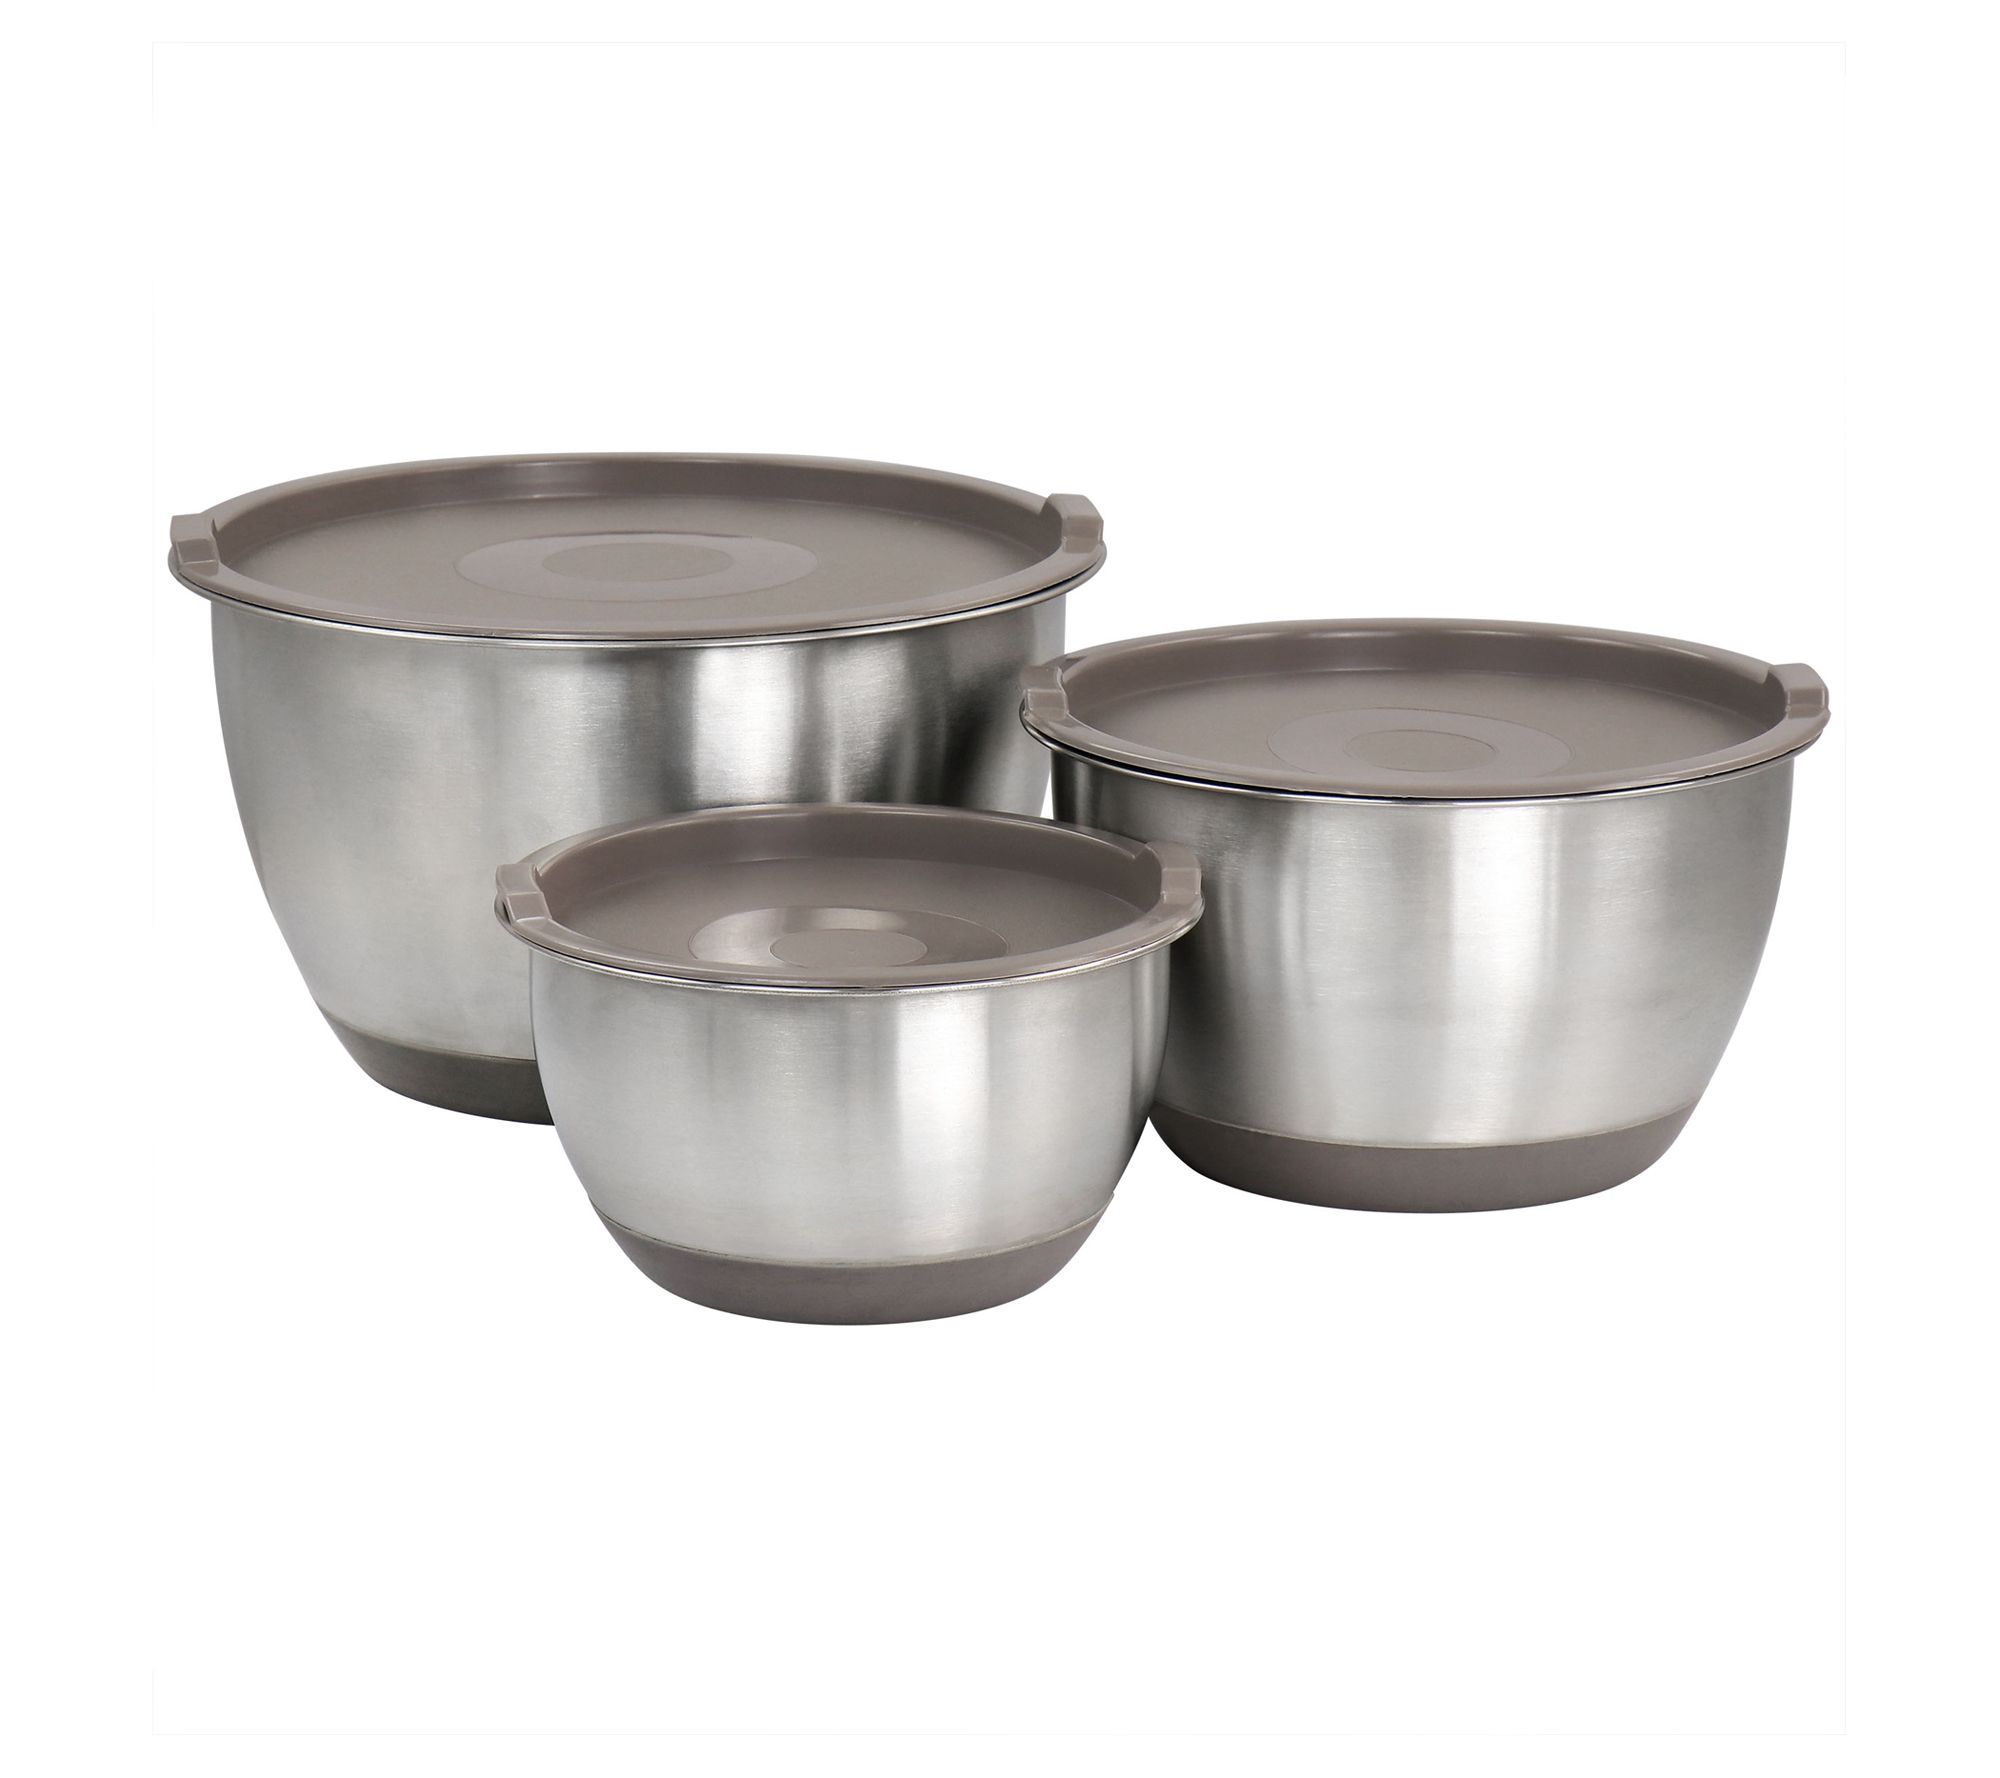 Oster 3 Piece Stainless Steel Multifunction Prep Bowl Set